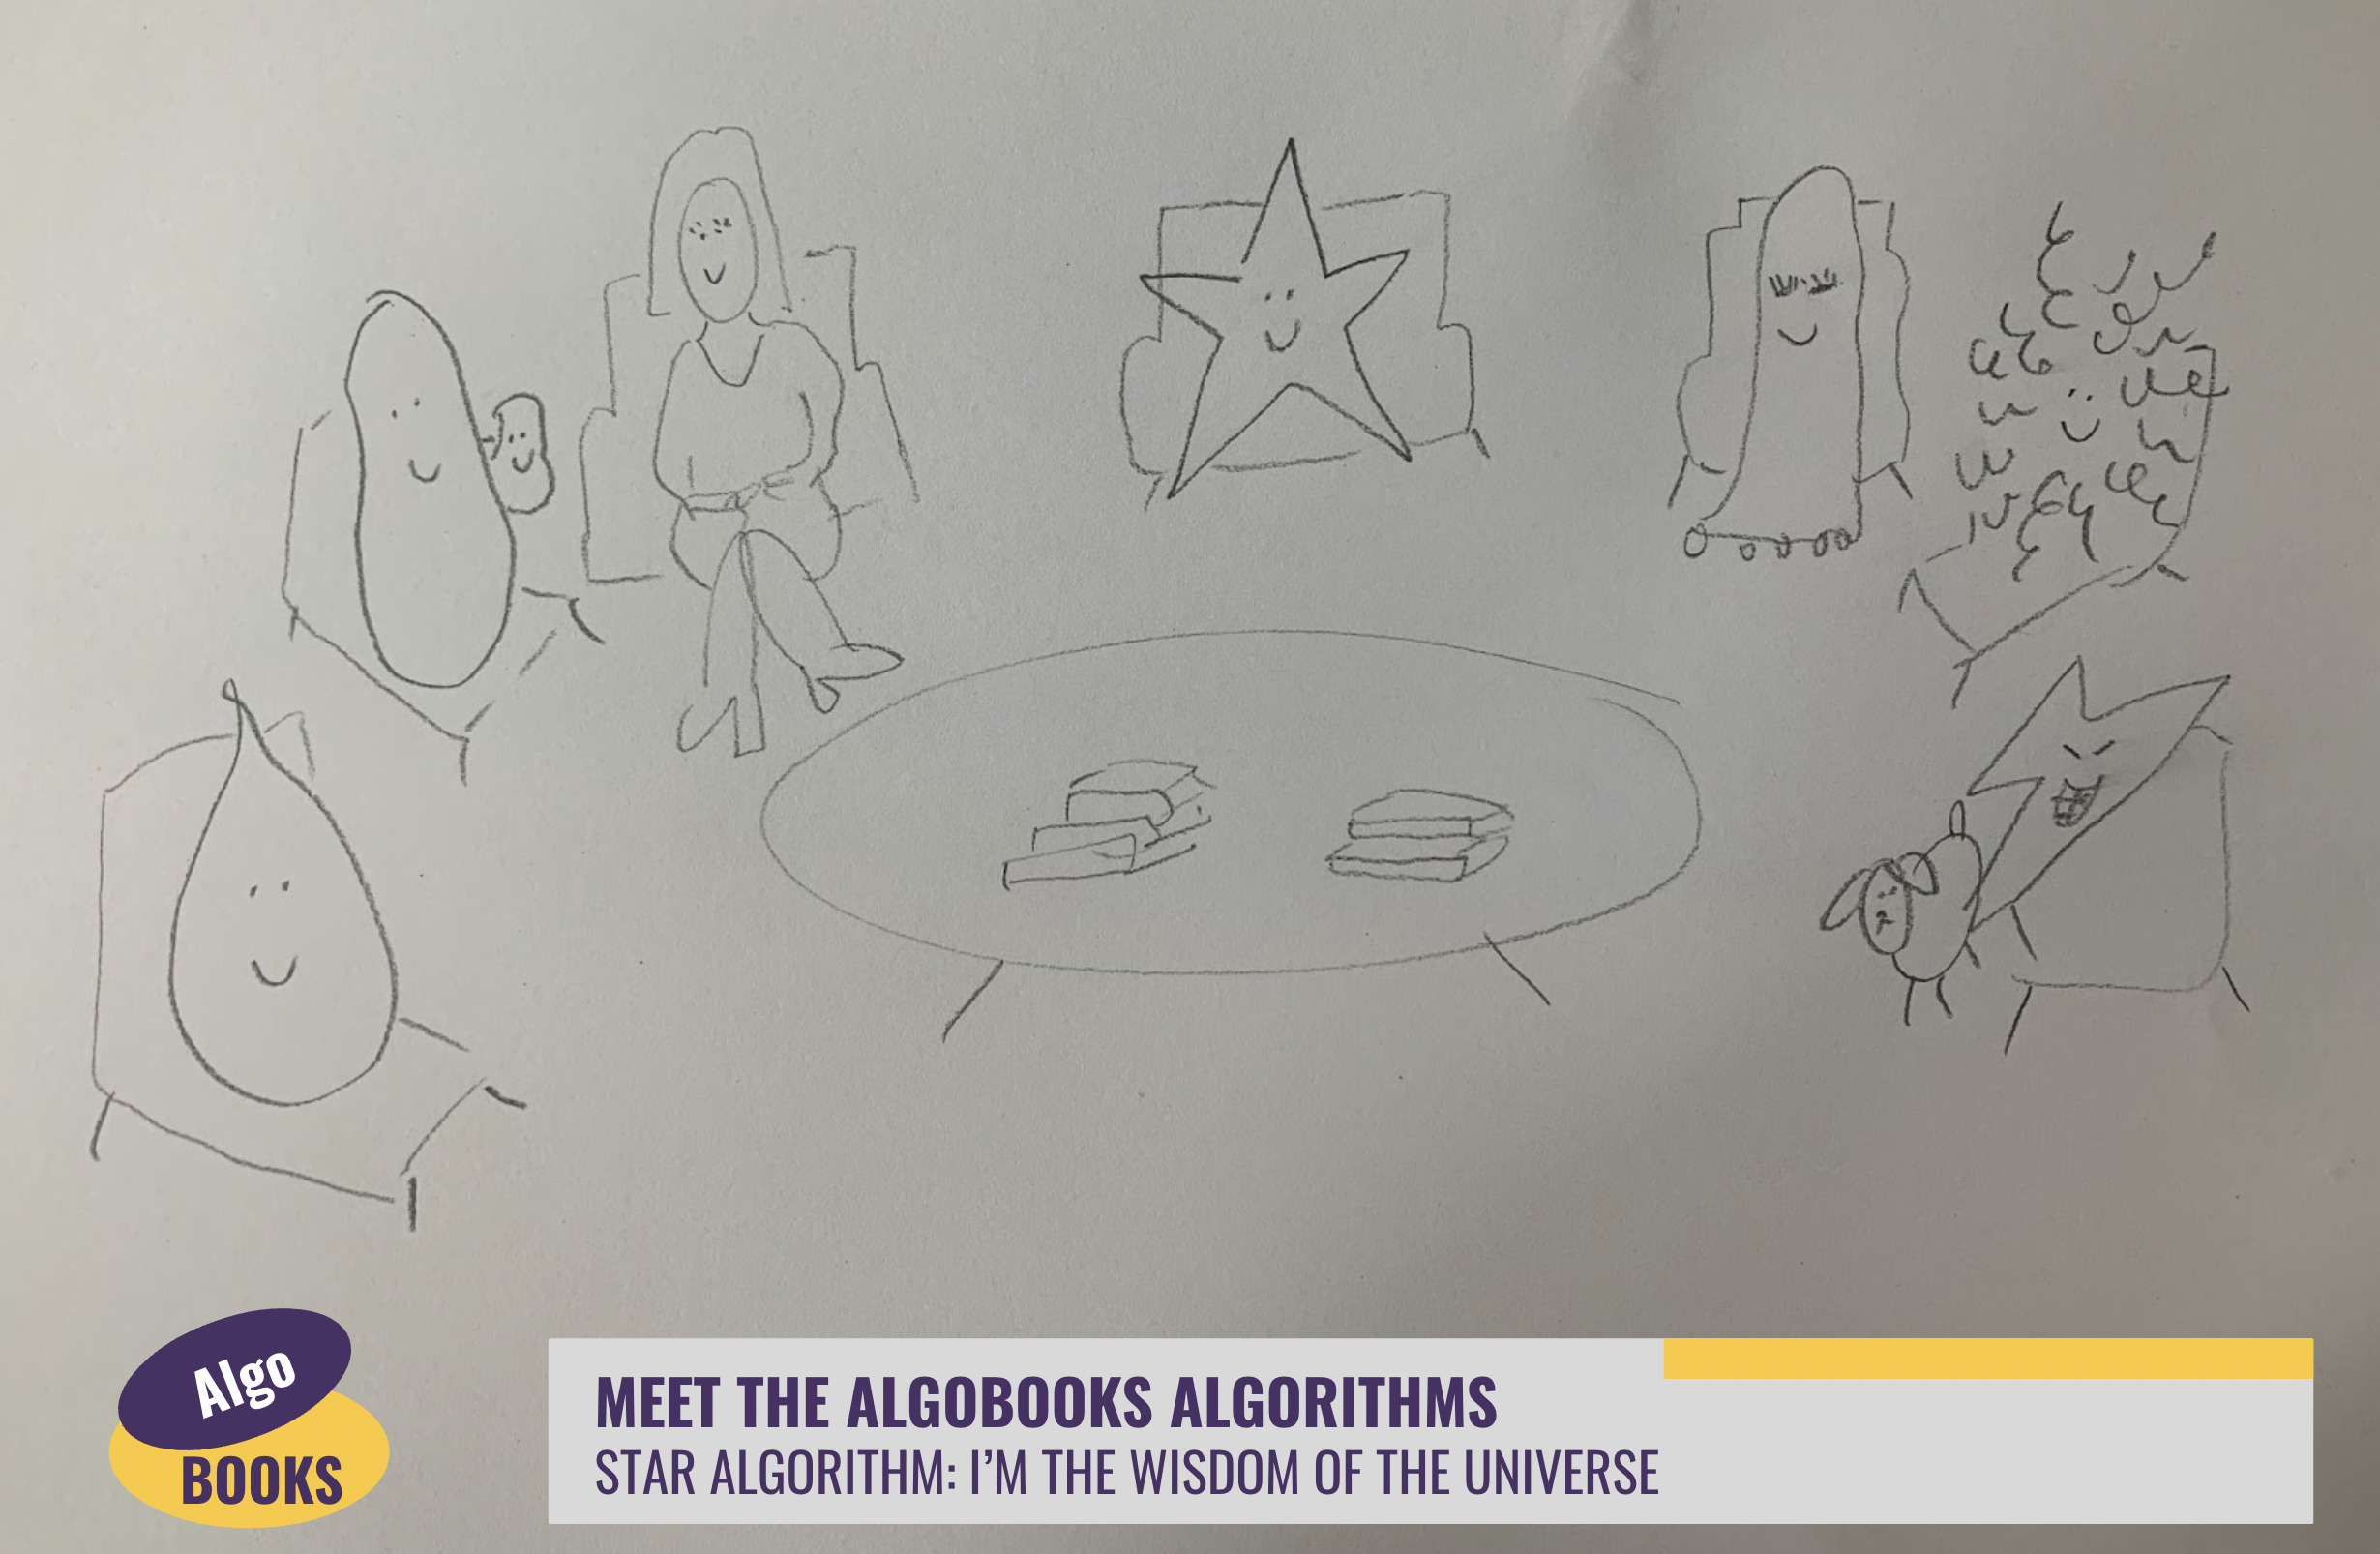 An artist's impression of a screenshot of the Algos in the Breakfast with AlgoBooks studio.